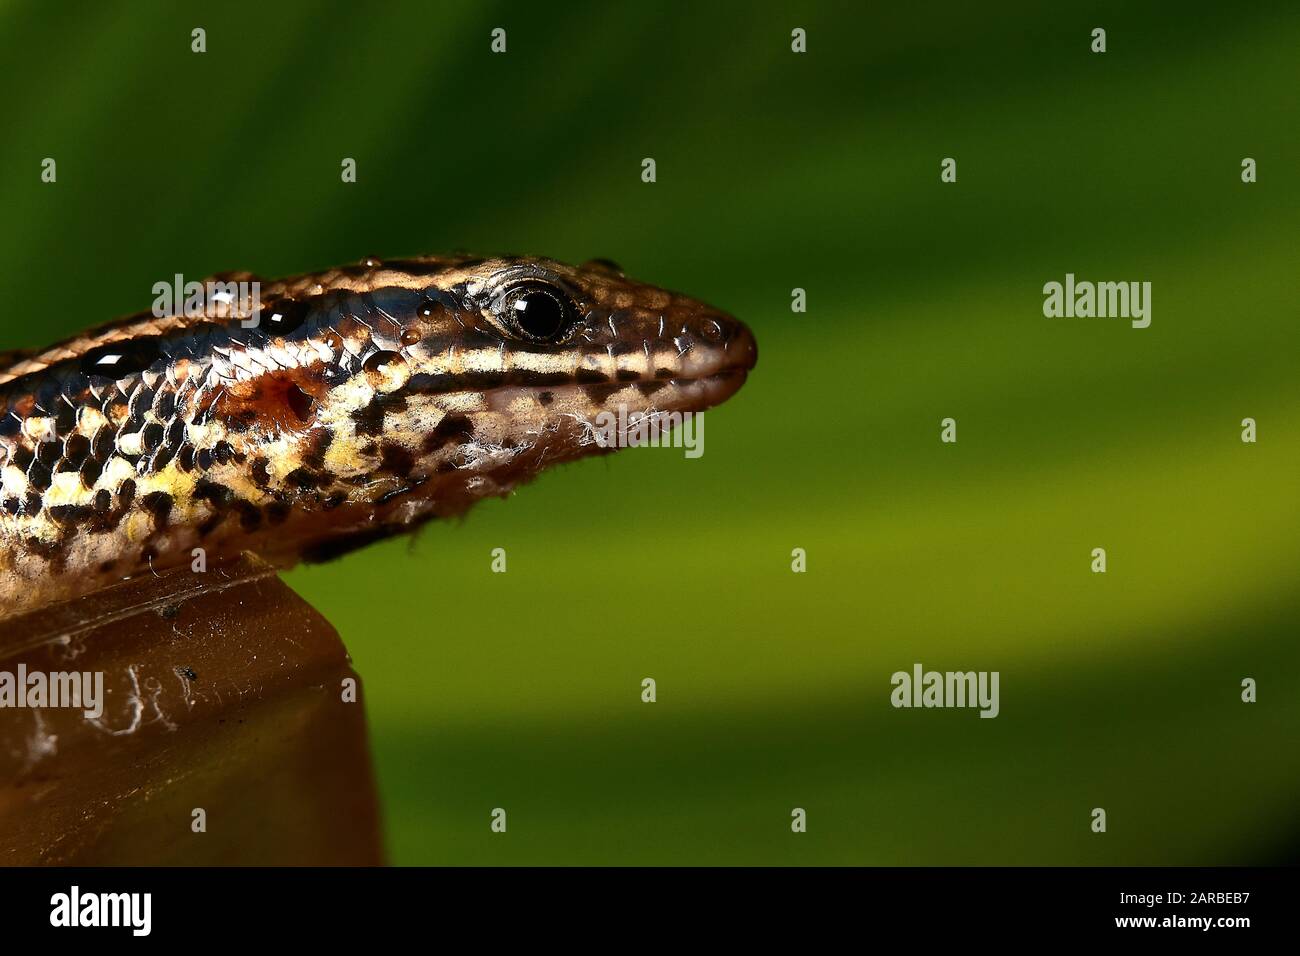 Closeup of Grass lizard or asian grass lizard isolated on green leaf background. macro view - image Stock Photo